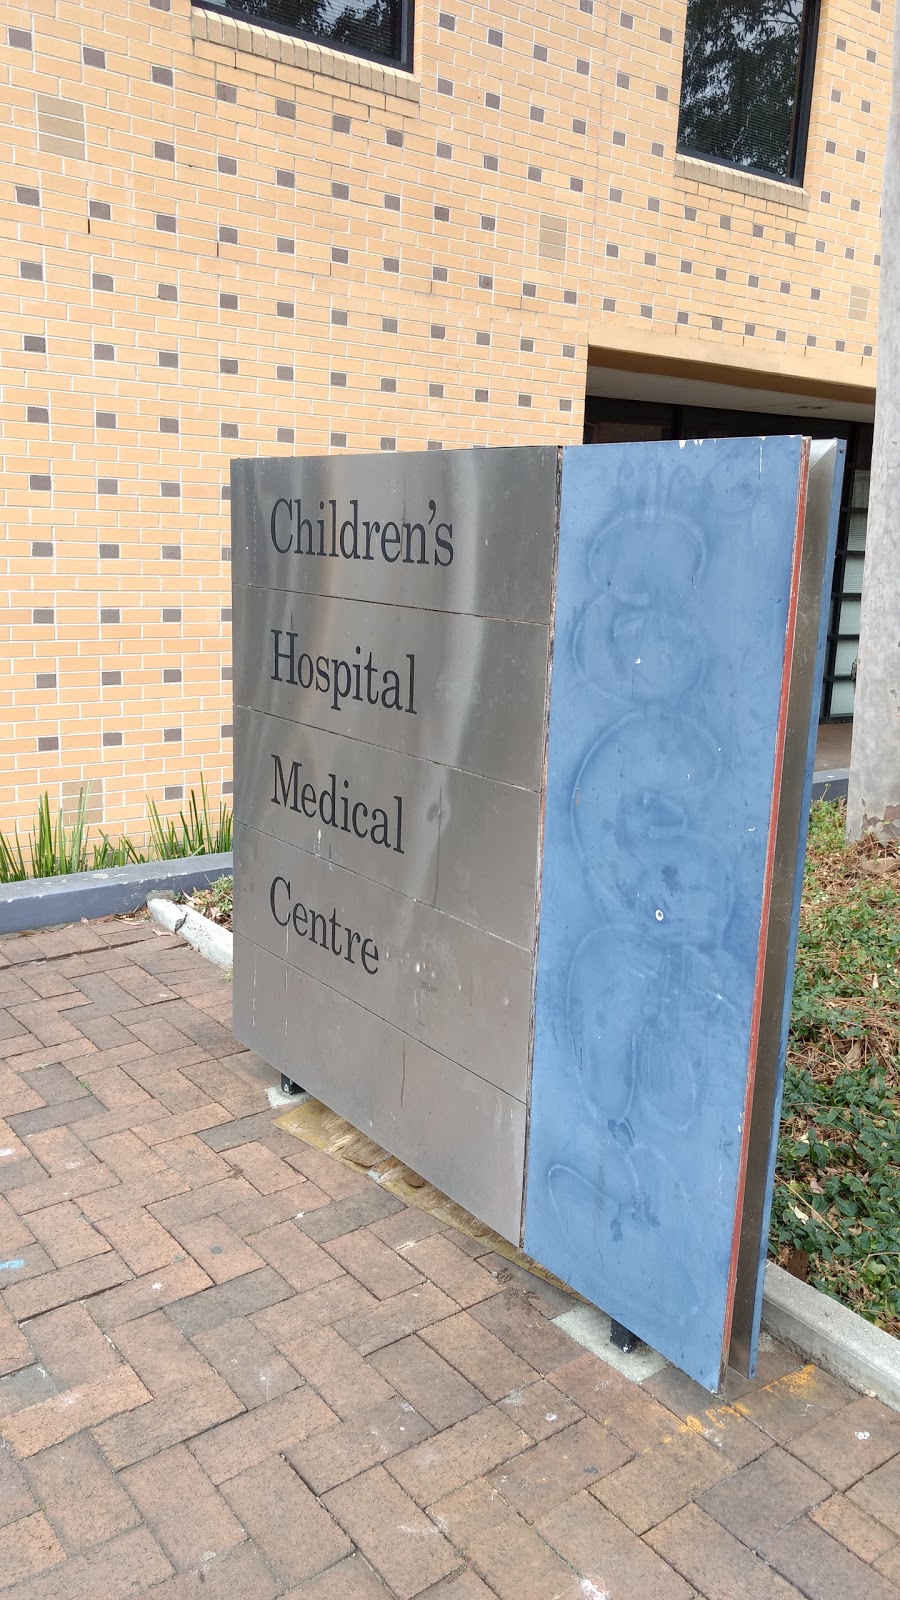 Children’s Hospital Medical Centre | hospital | Hawkesbury Road and, Hainsworth St, Westmead NSW 2145, Australia | 0298450000 OR +61 2 9845 0000